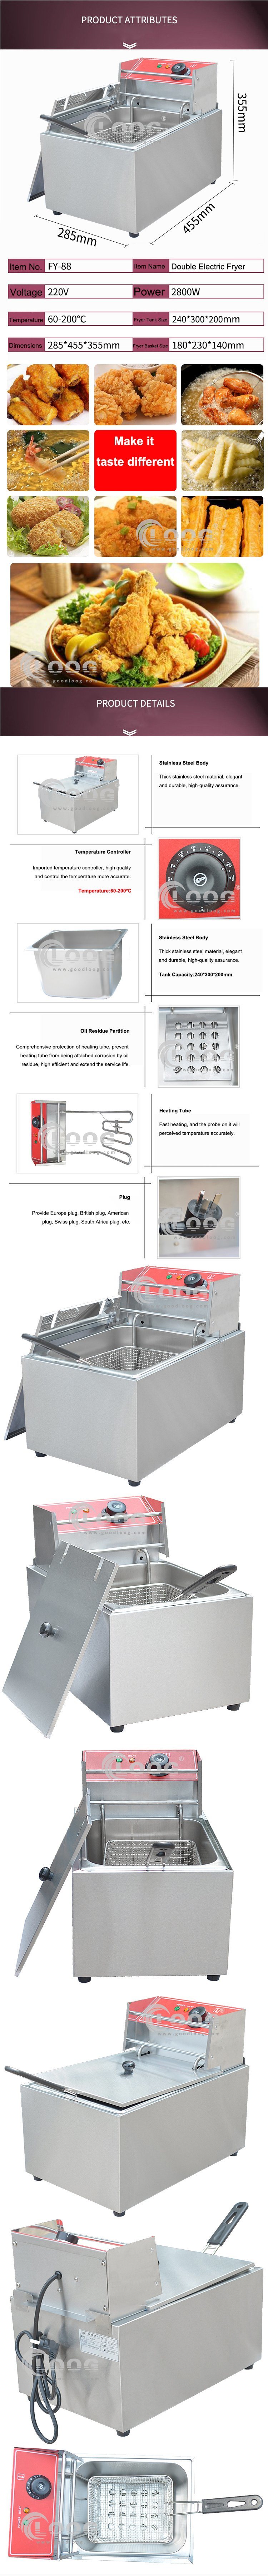 Commercial Electric Fryer Stainless Steel Fryer Double Baskets Frying Machine Electric Countertop Deep Fryer with Strainer Electric Deep Fryer Stainless Steel